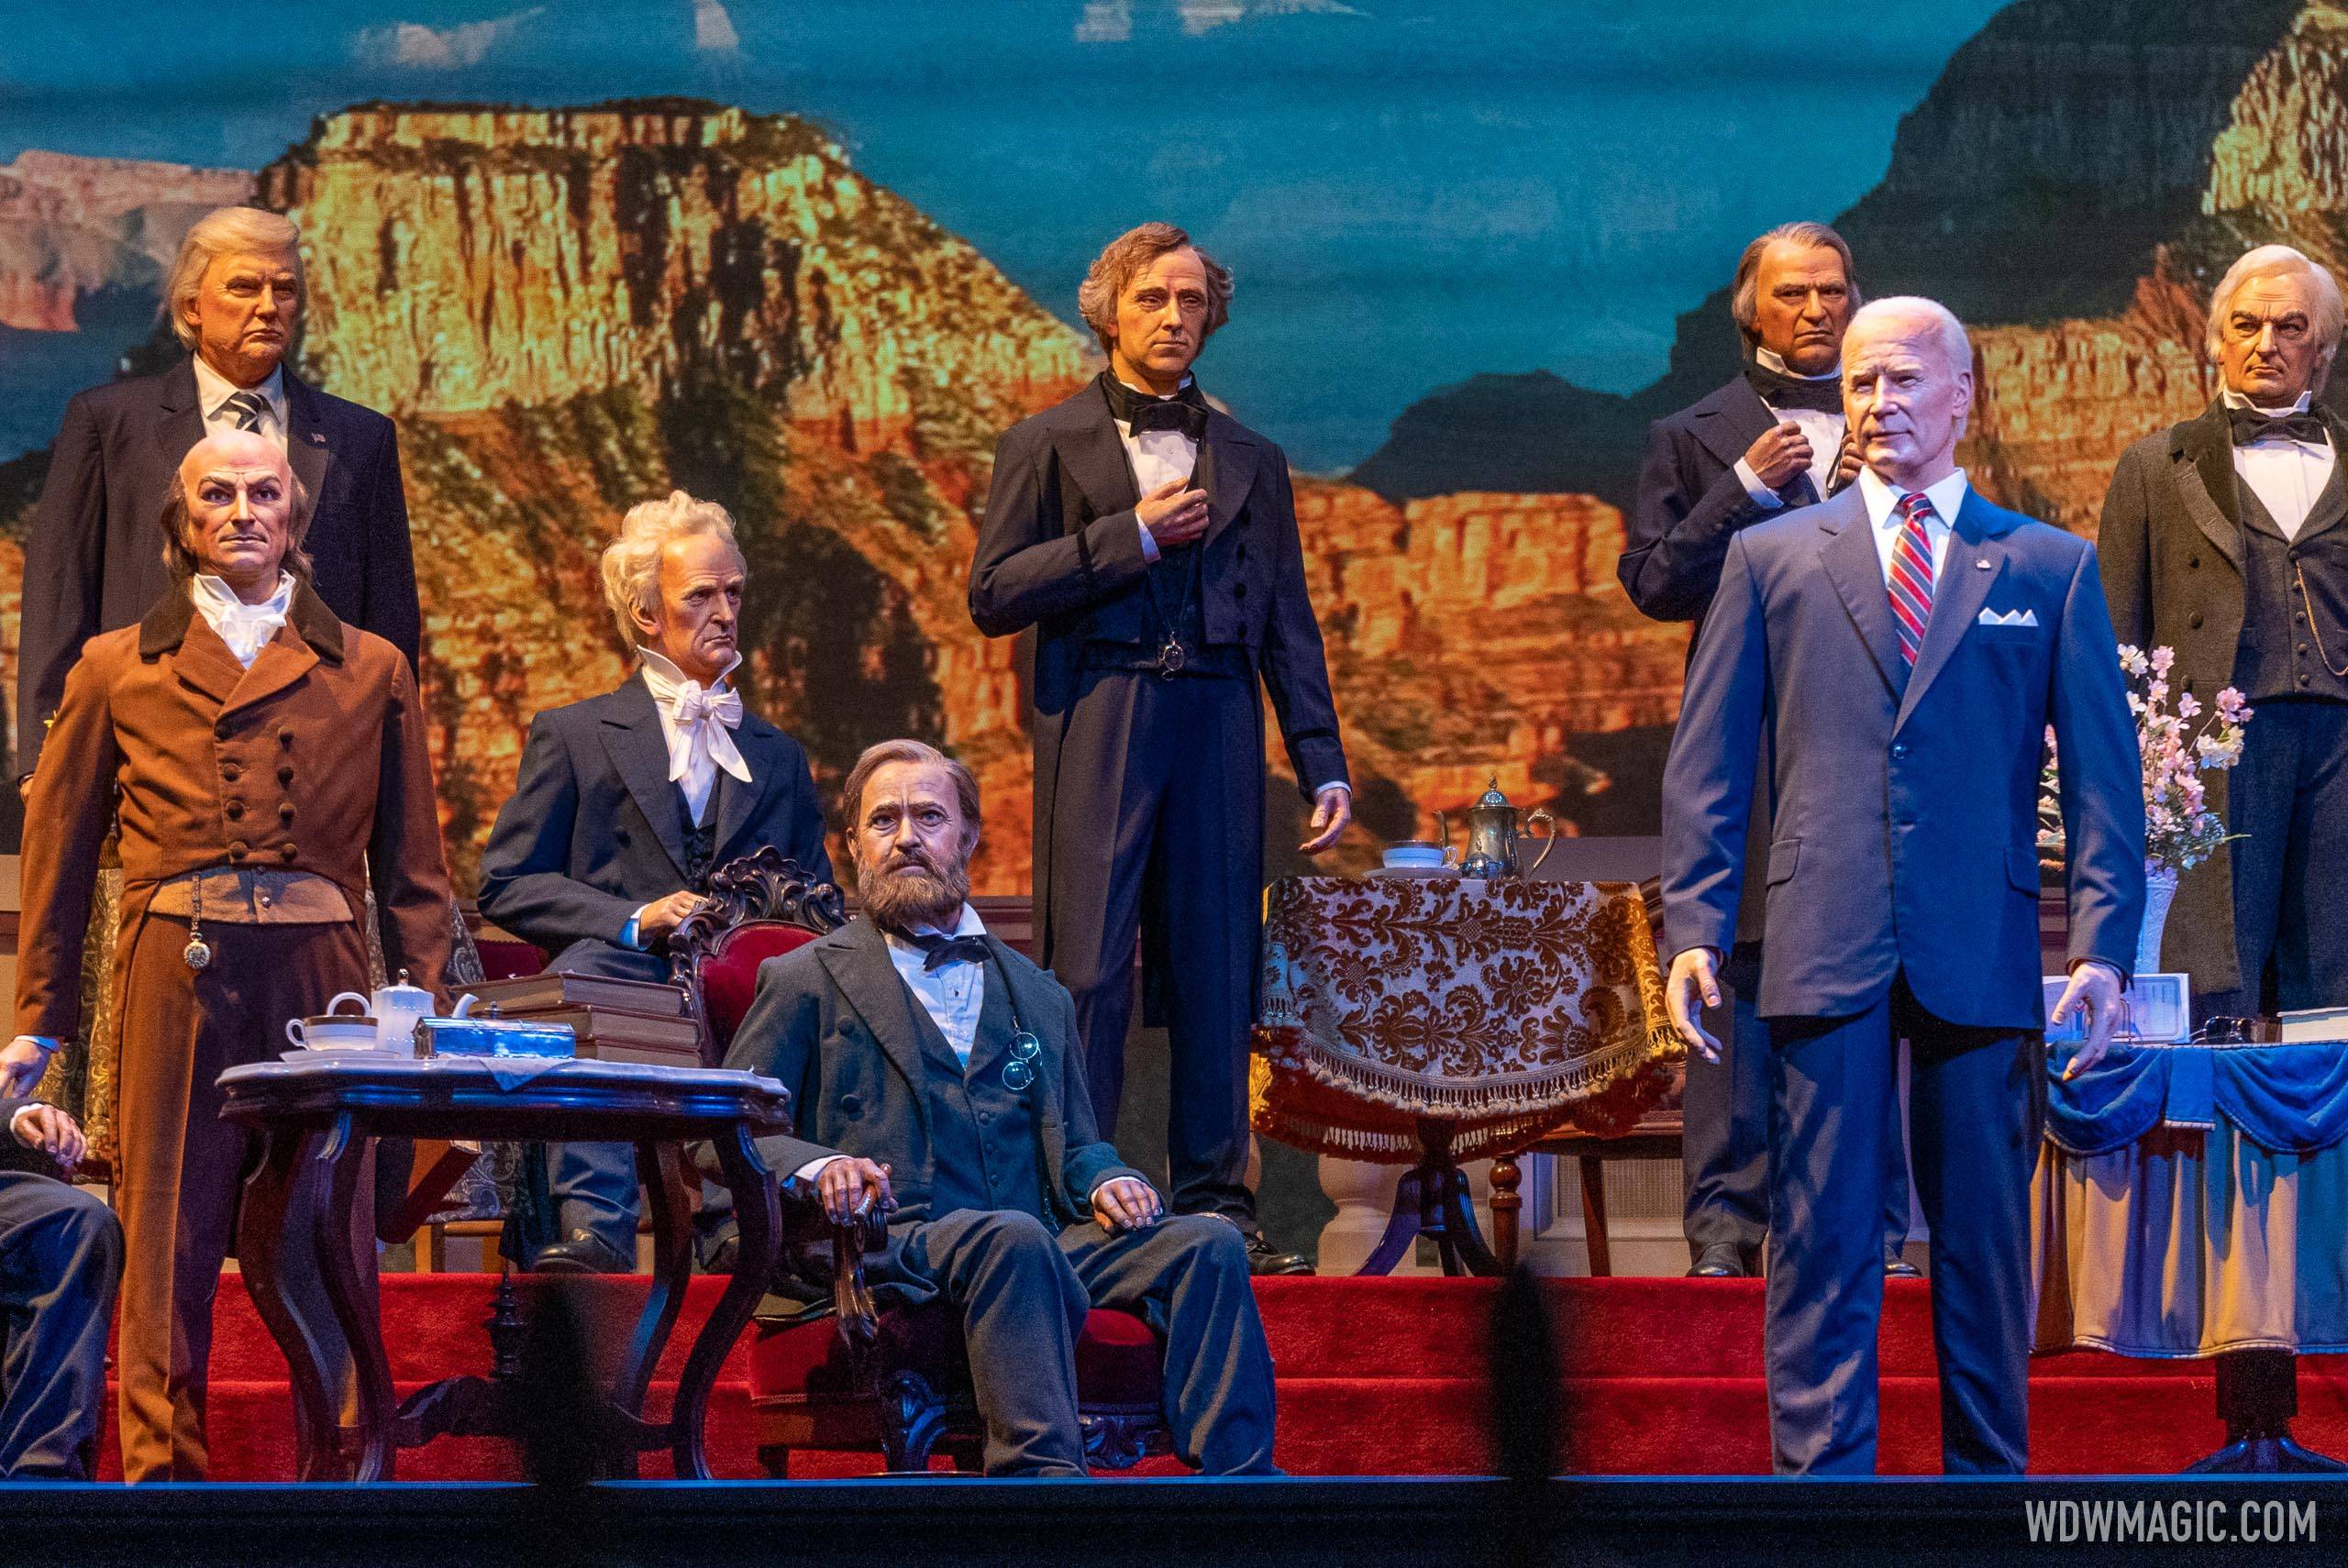 Donald Trump has been moved to the left of Joe Biden in the Hall of Presidents